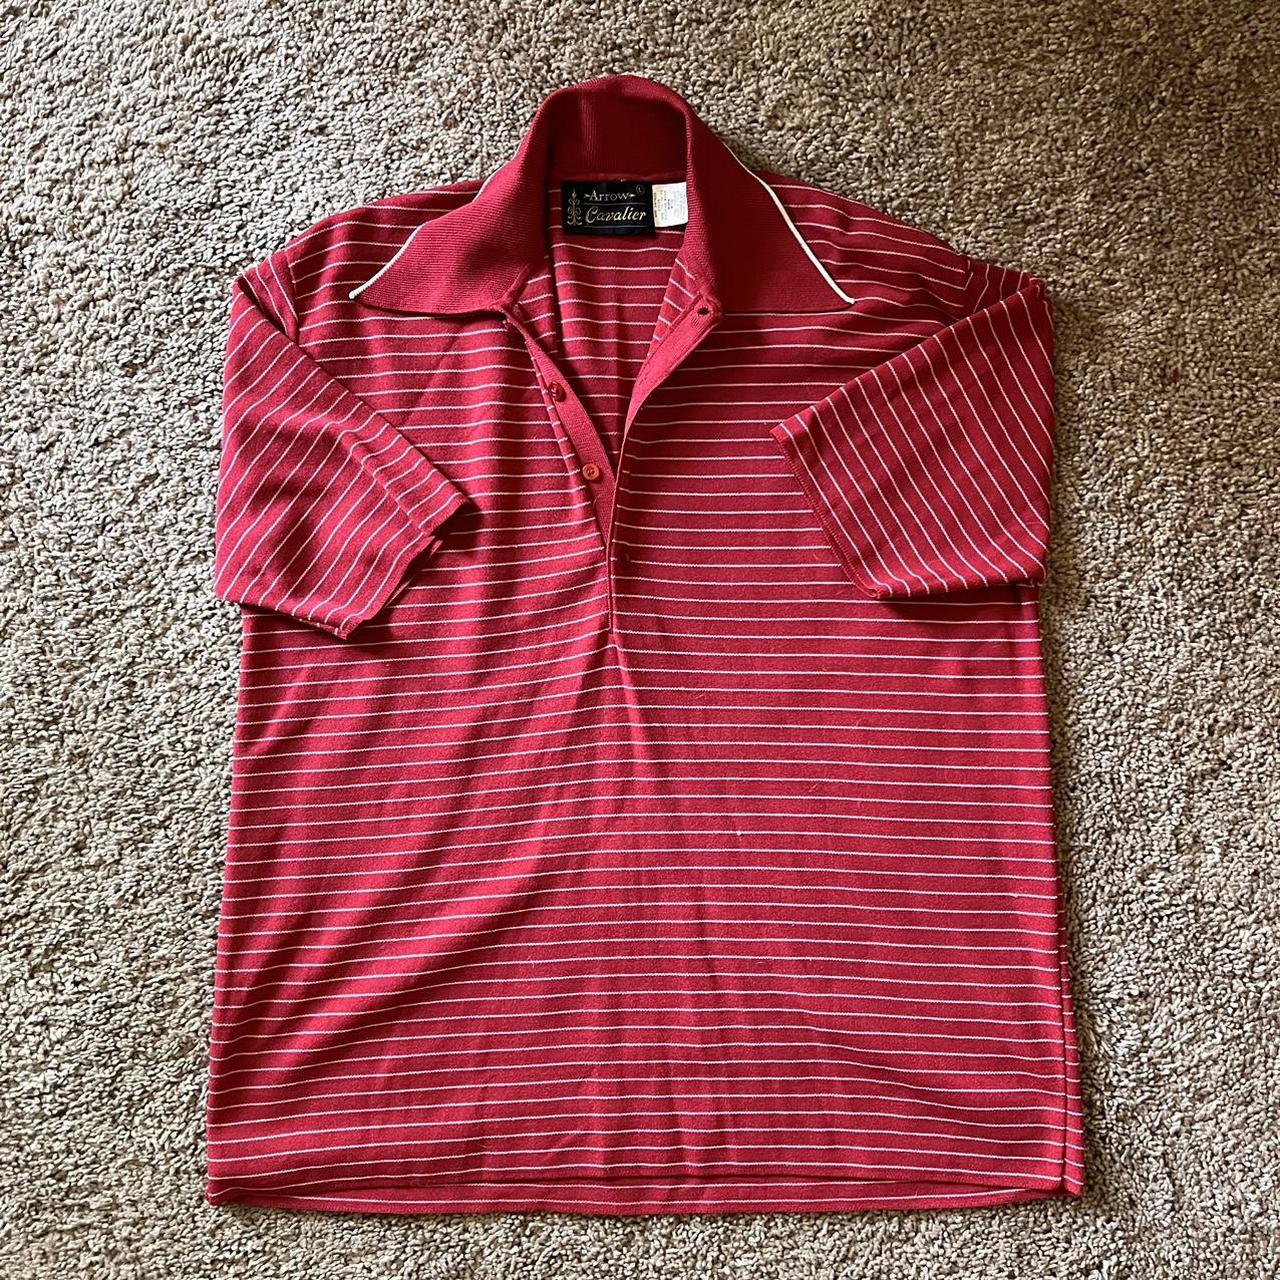 Vintage 1970’s/1980’s red and white striped polo by... - Depop